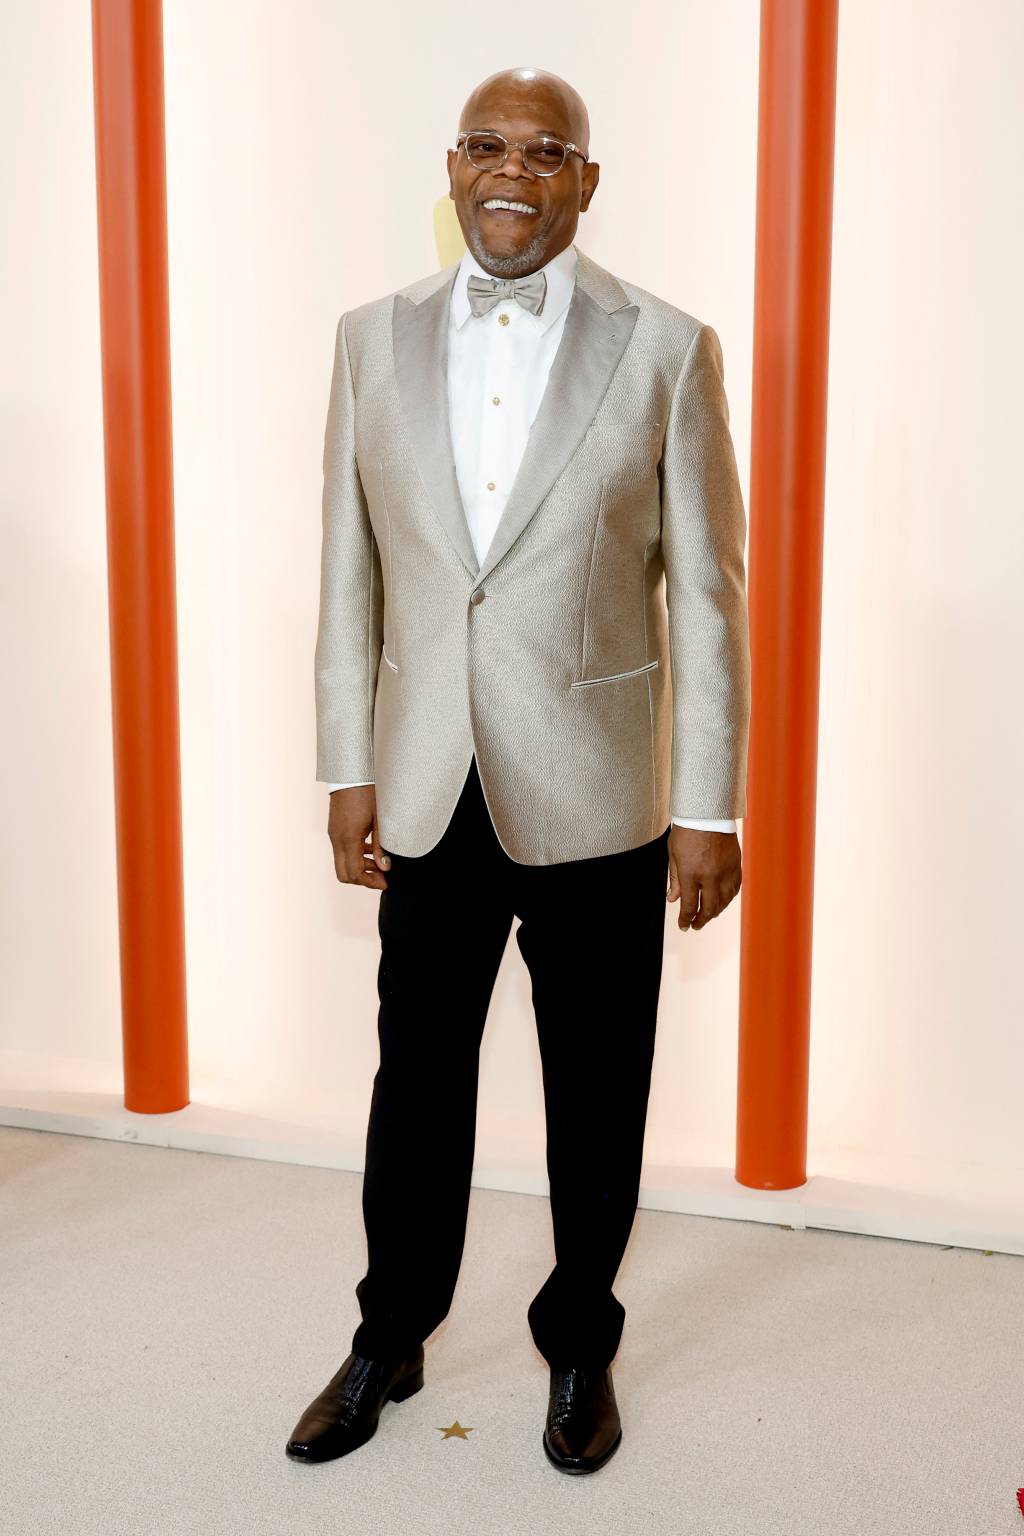 HOLLYWOOD, CALIFORNIA - MARCH 12: Samuel L. Jackson attends the 95th Annual Academy Awards on March 12, 2023 in Hollywood, California. Mike Coppola/Getty Images/AFP (Photo by Mike Coppola / GETTY IMAGES NORTH AMERICA / Getty Images via AFP)